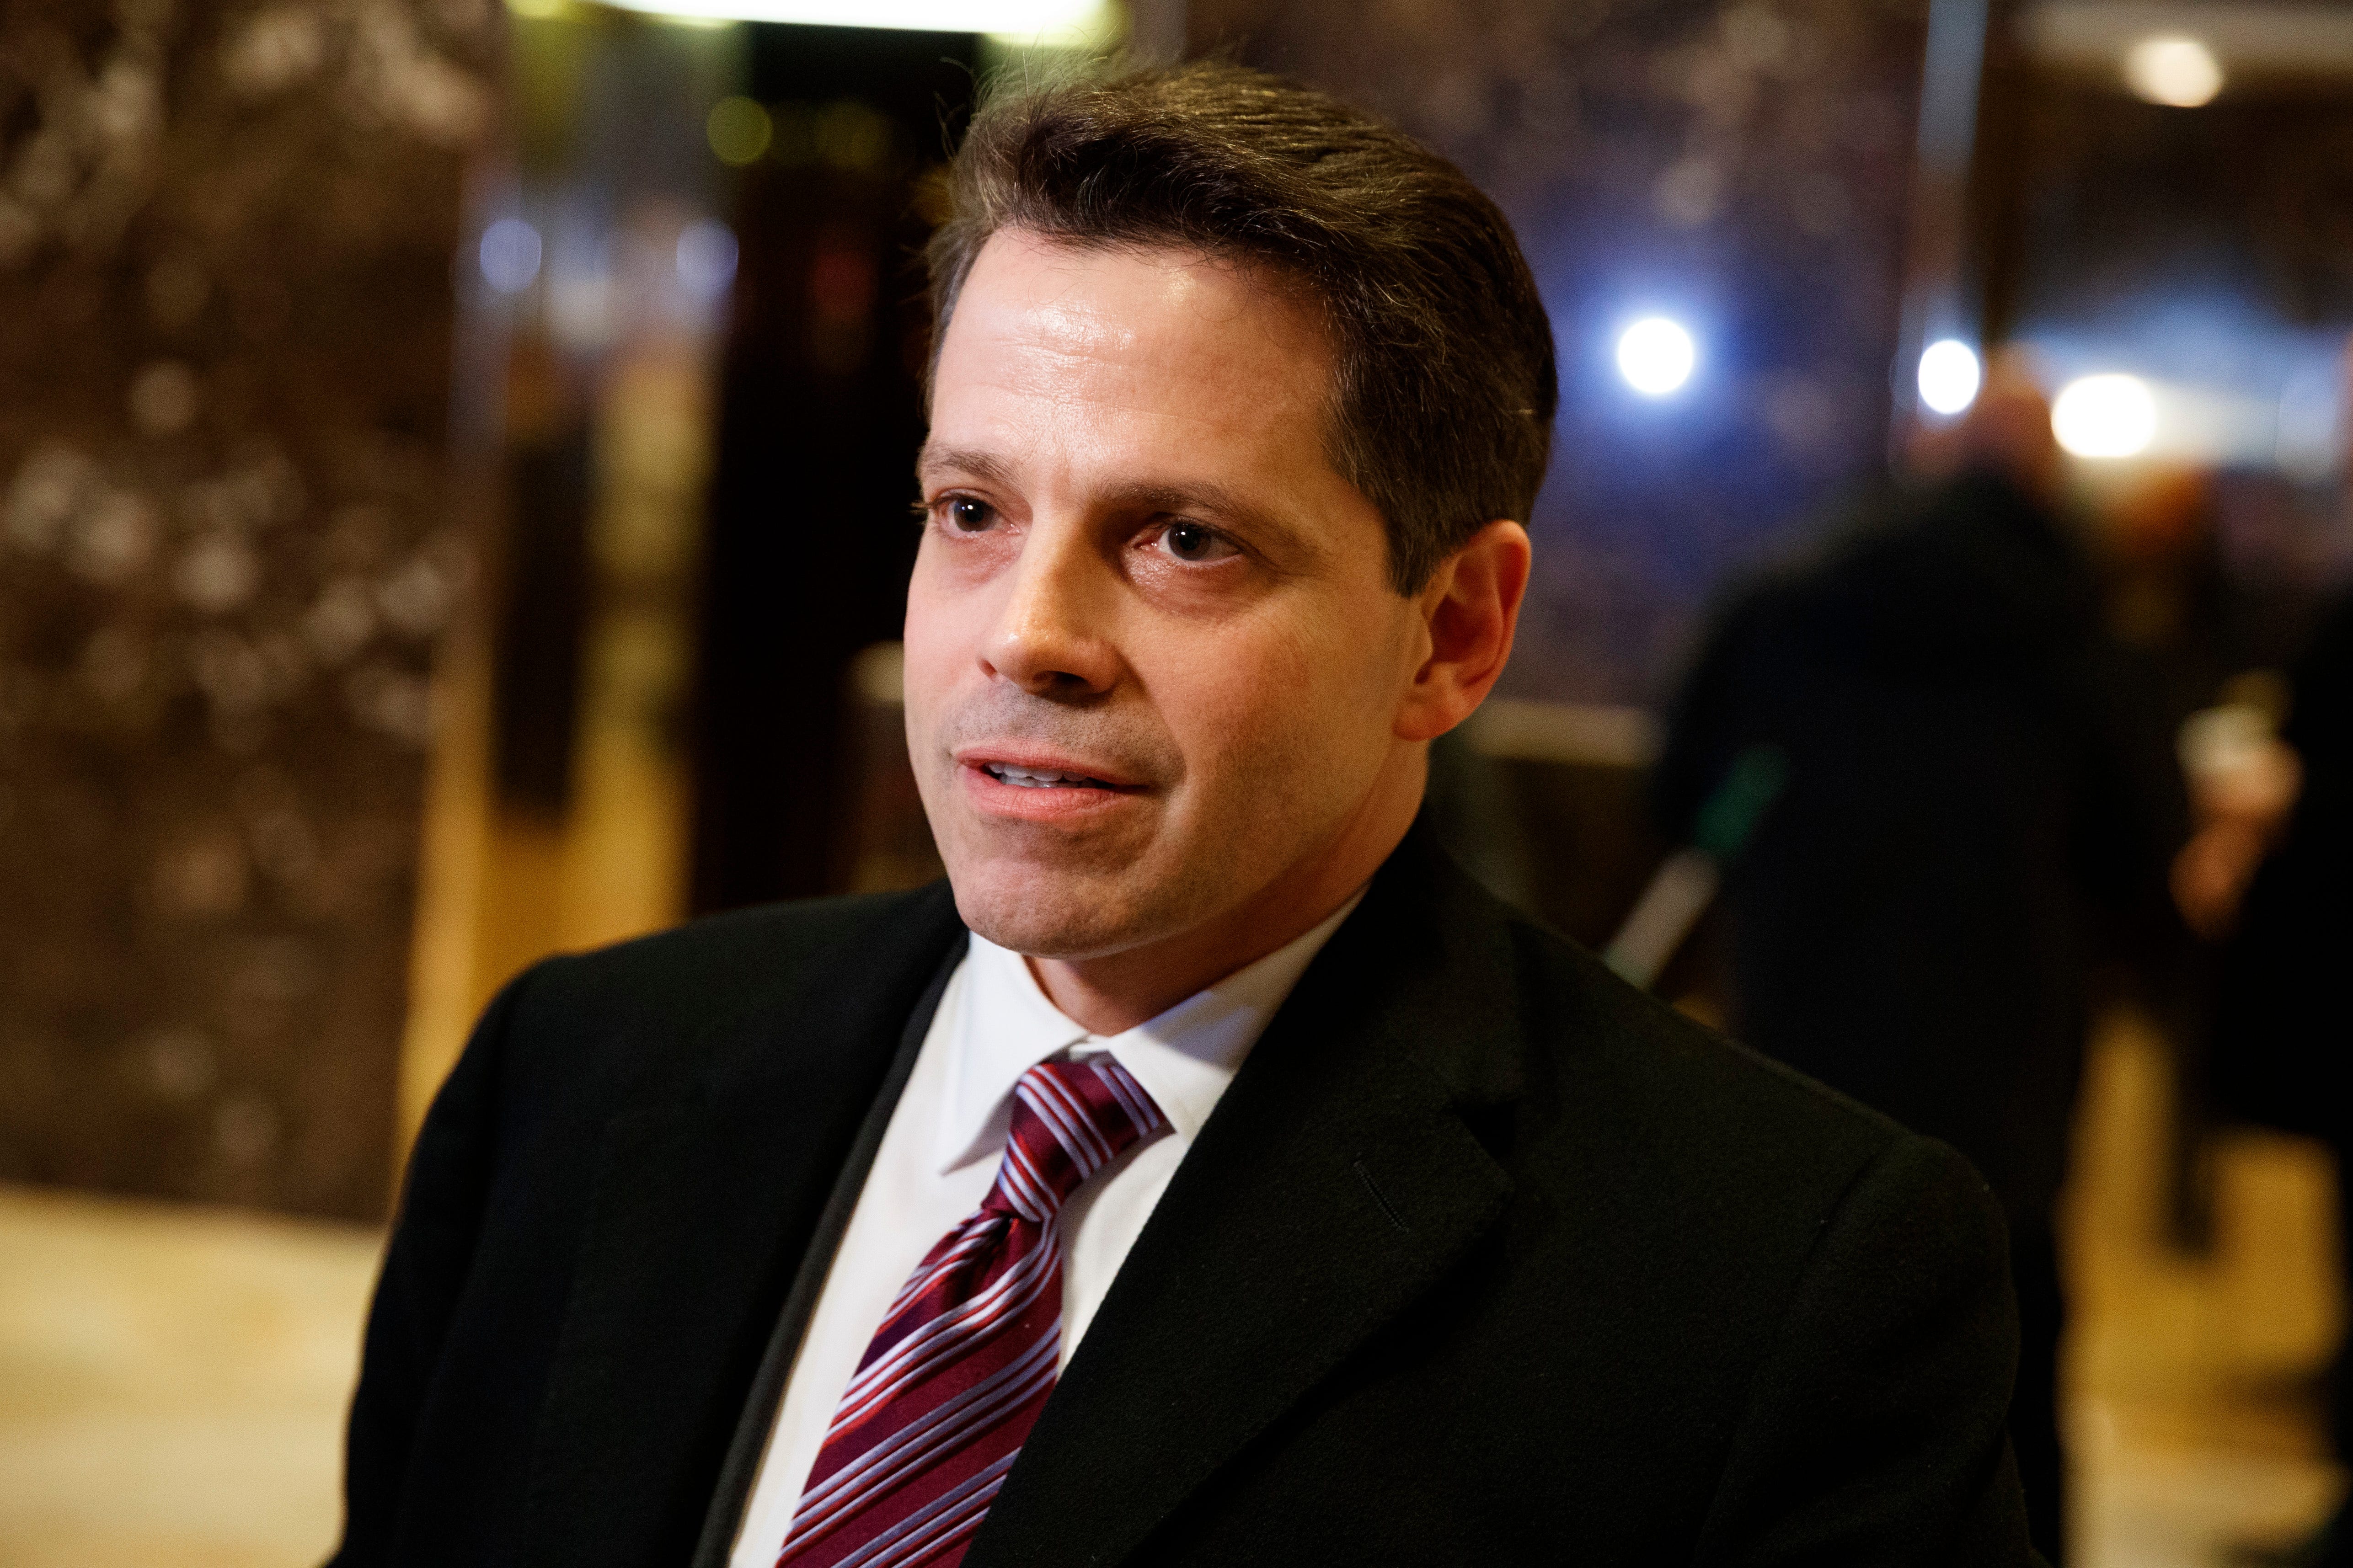 Anthony Scaramucci to be White House communications director